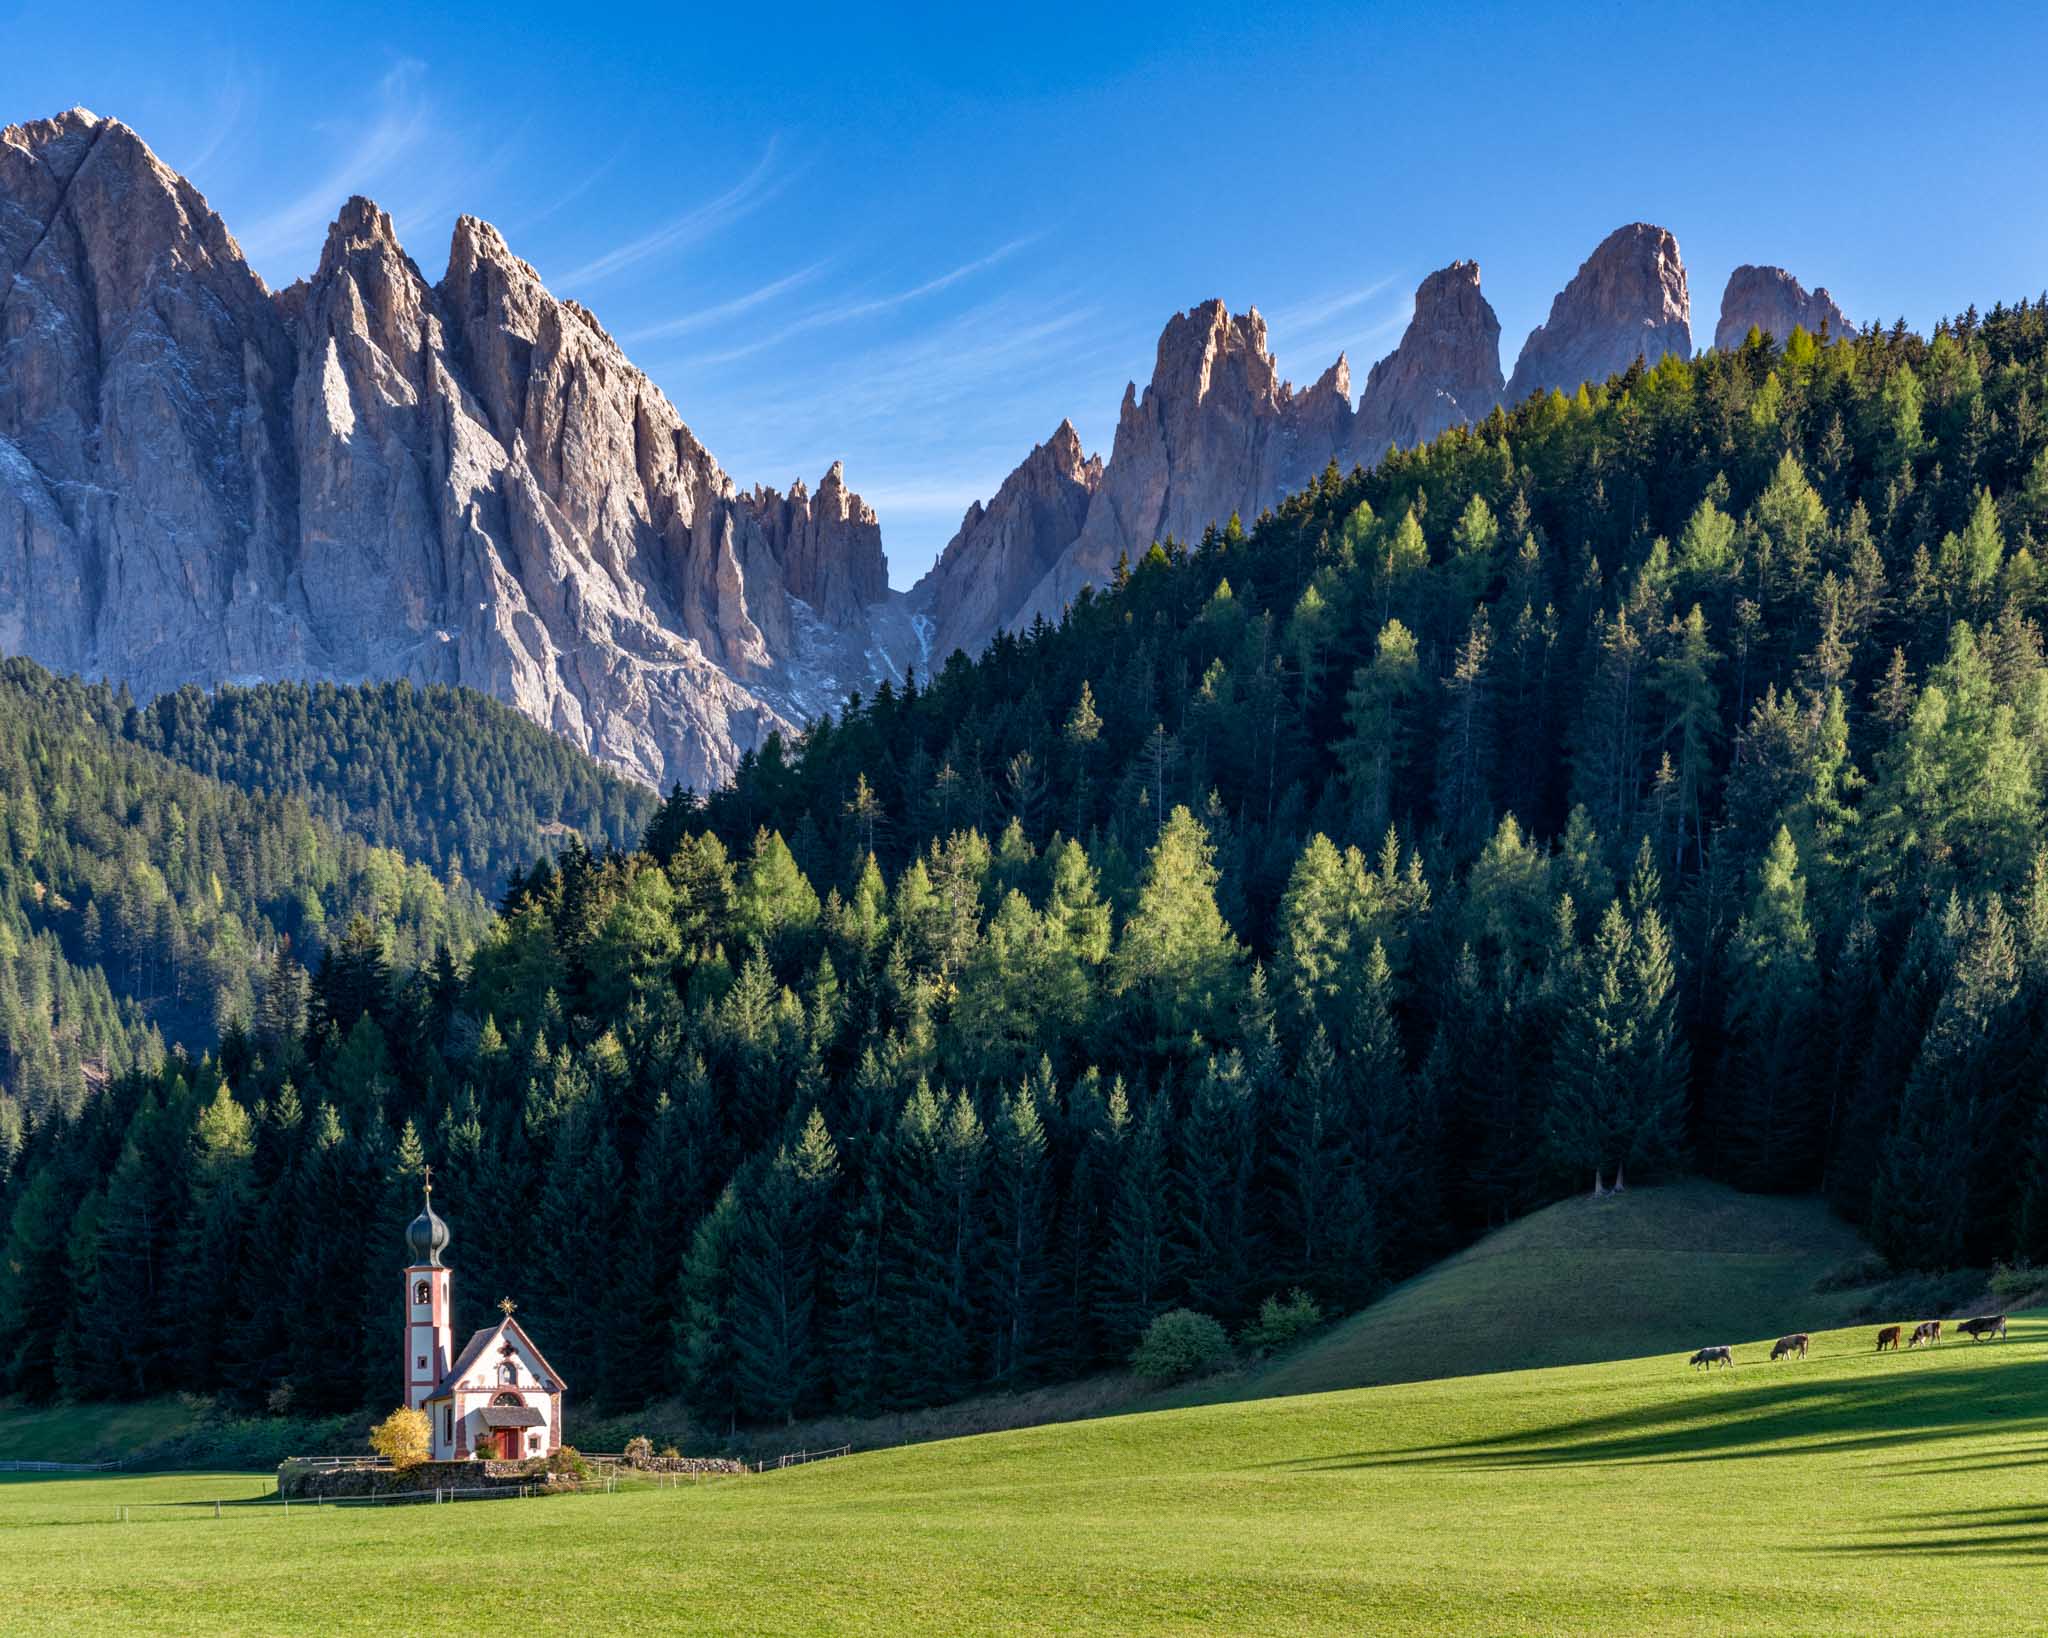 a church in a field with trees and mountains in the background